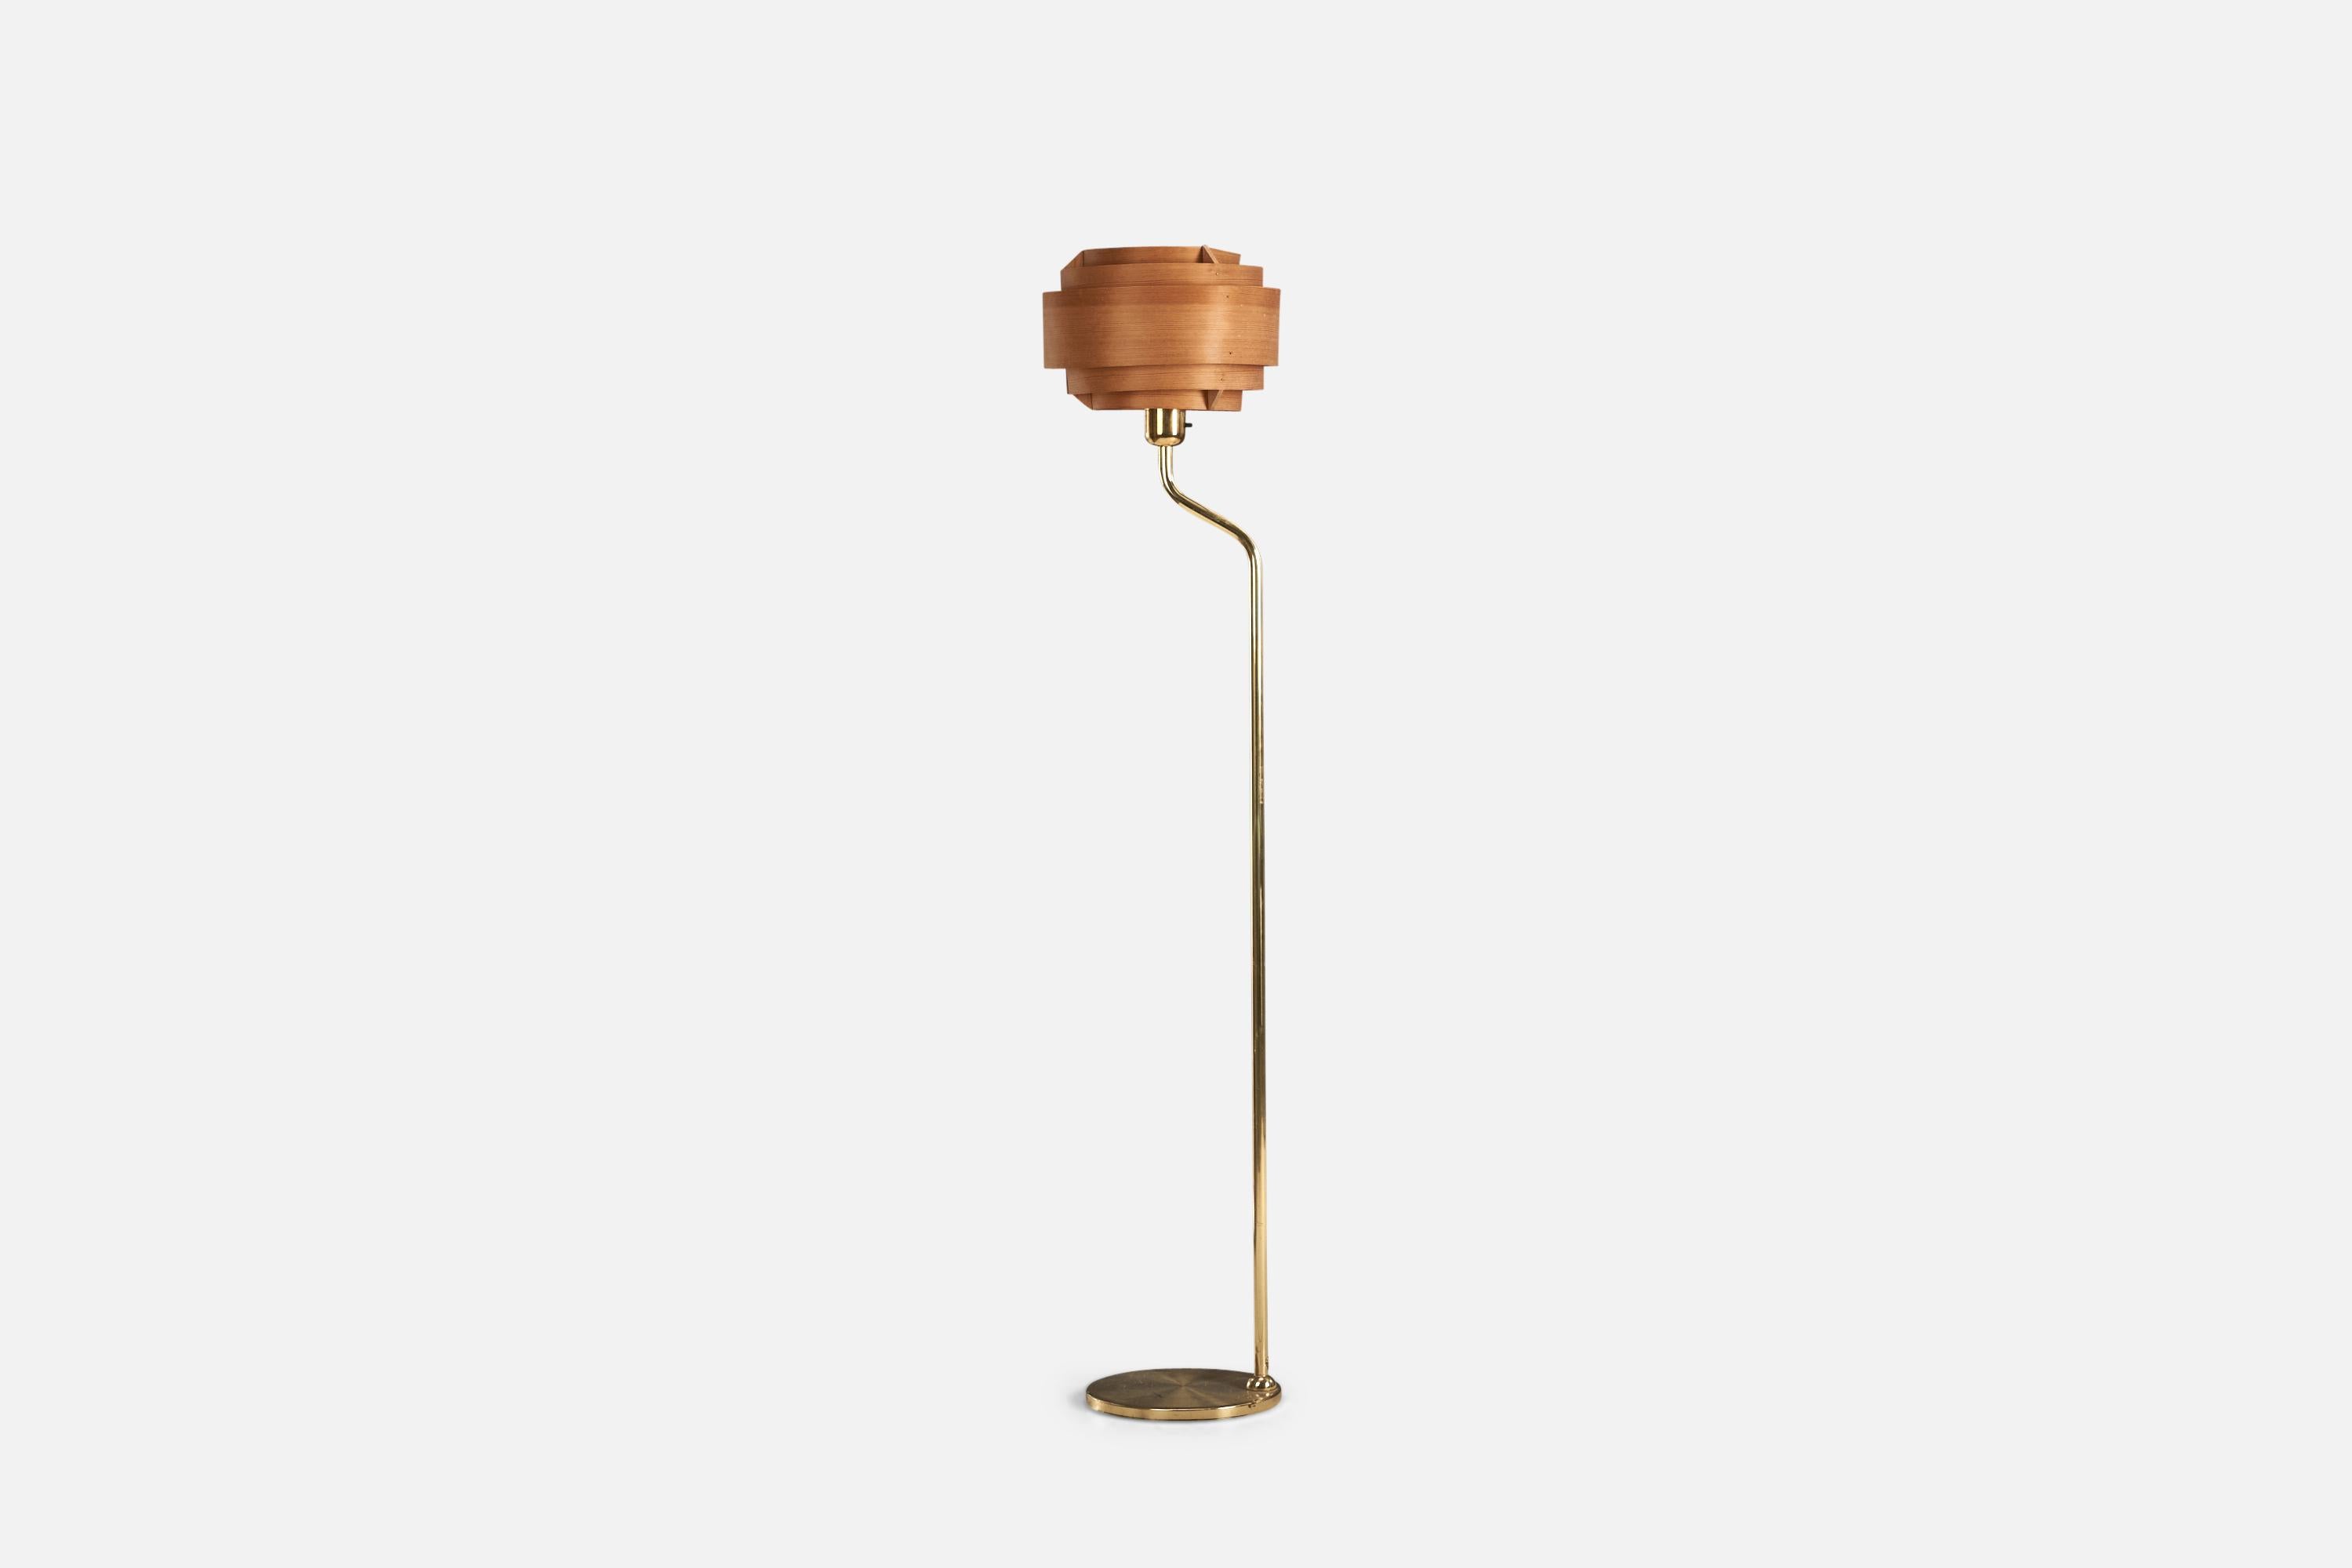 A brass and moulded pine veneer floor lamp designed and produced by Nya Öia, Sweden, 1970s. 

With an assorted lampshade designed by Hans-Agne Jakobsson.

Socket takes standard E-26 medium base bulb.

There is no maximum wattage stated on the